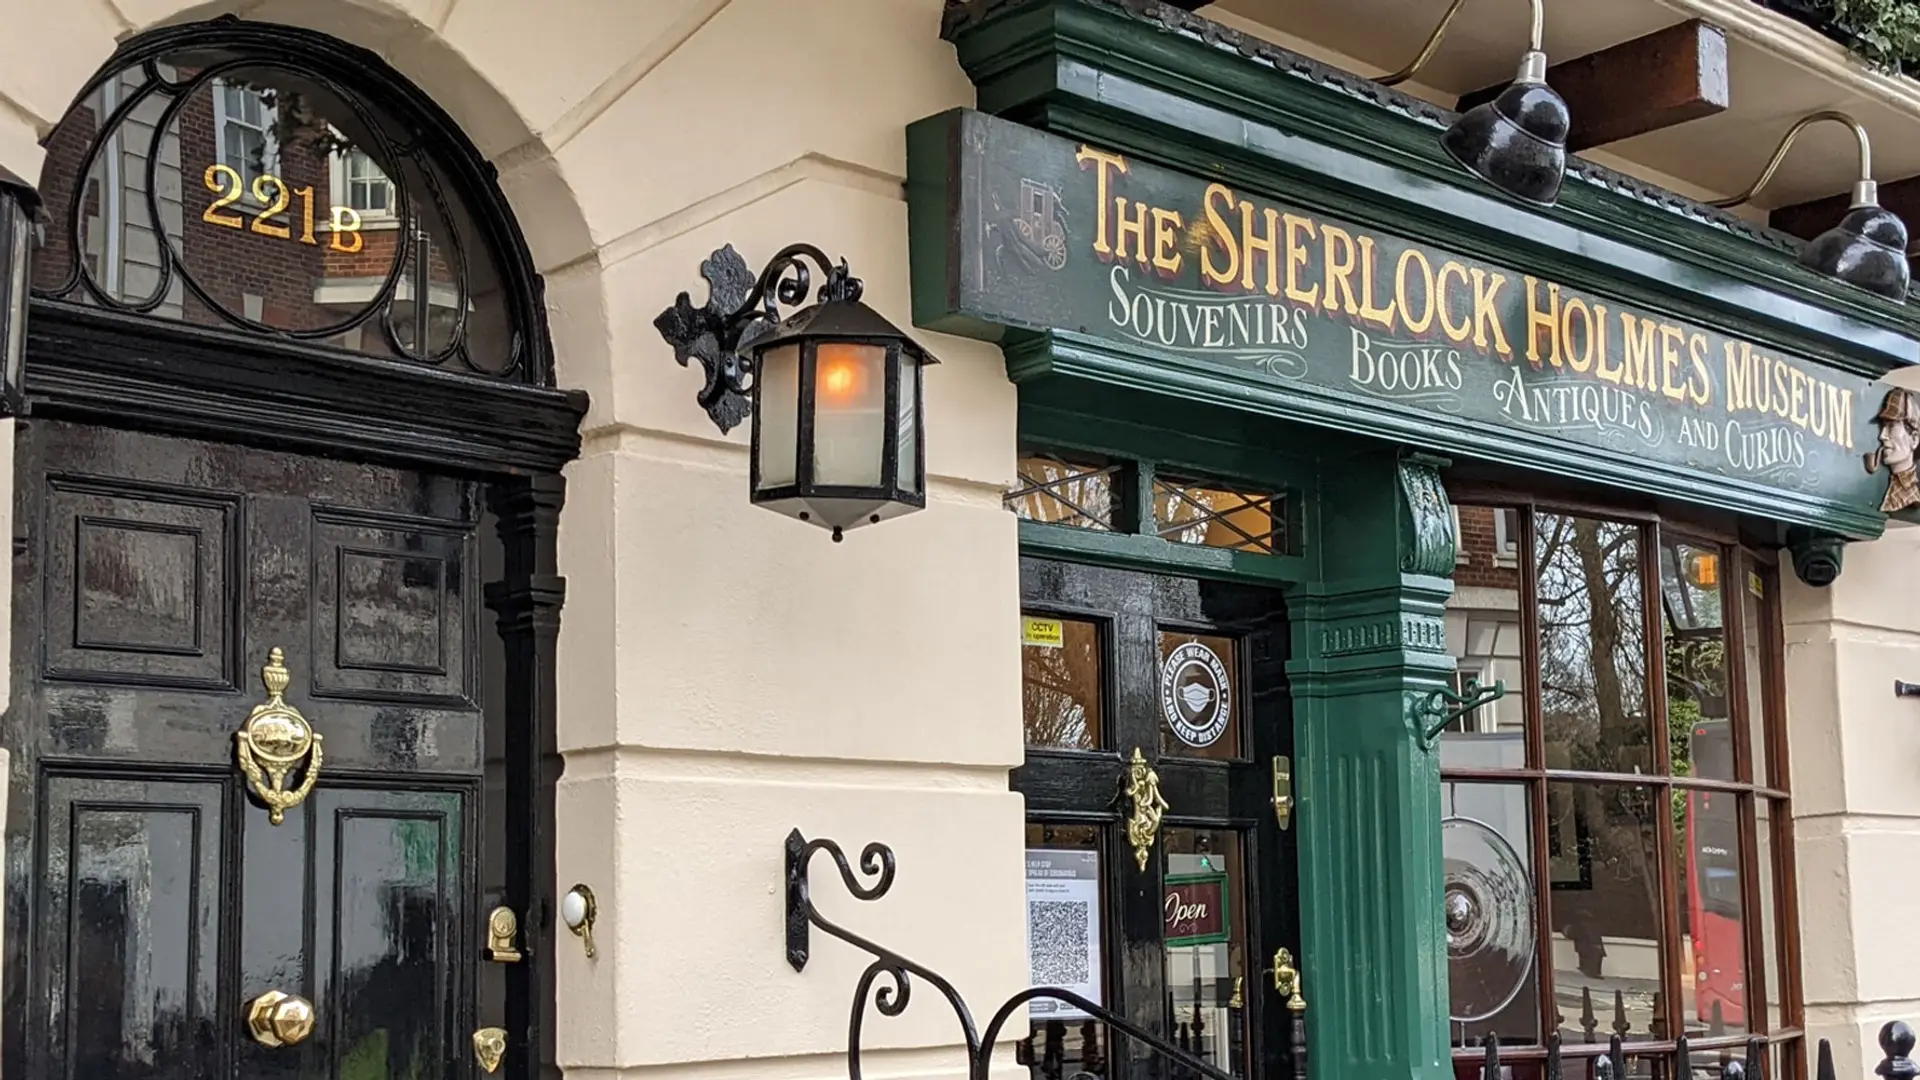 Sherlock Holmes Museum, one of the best museums in london